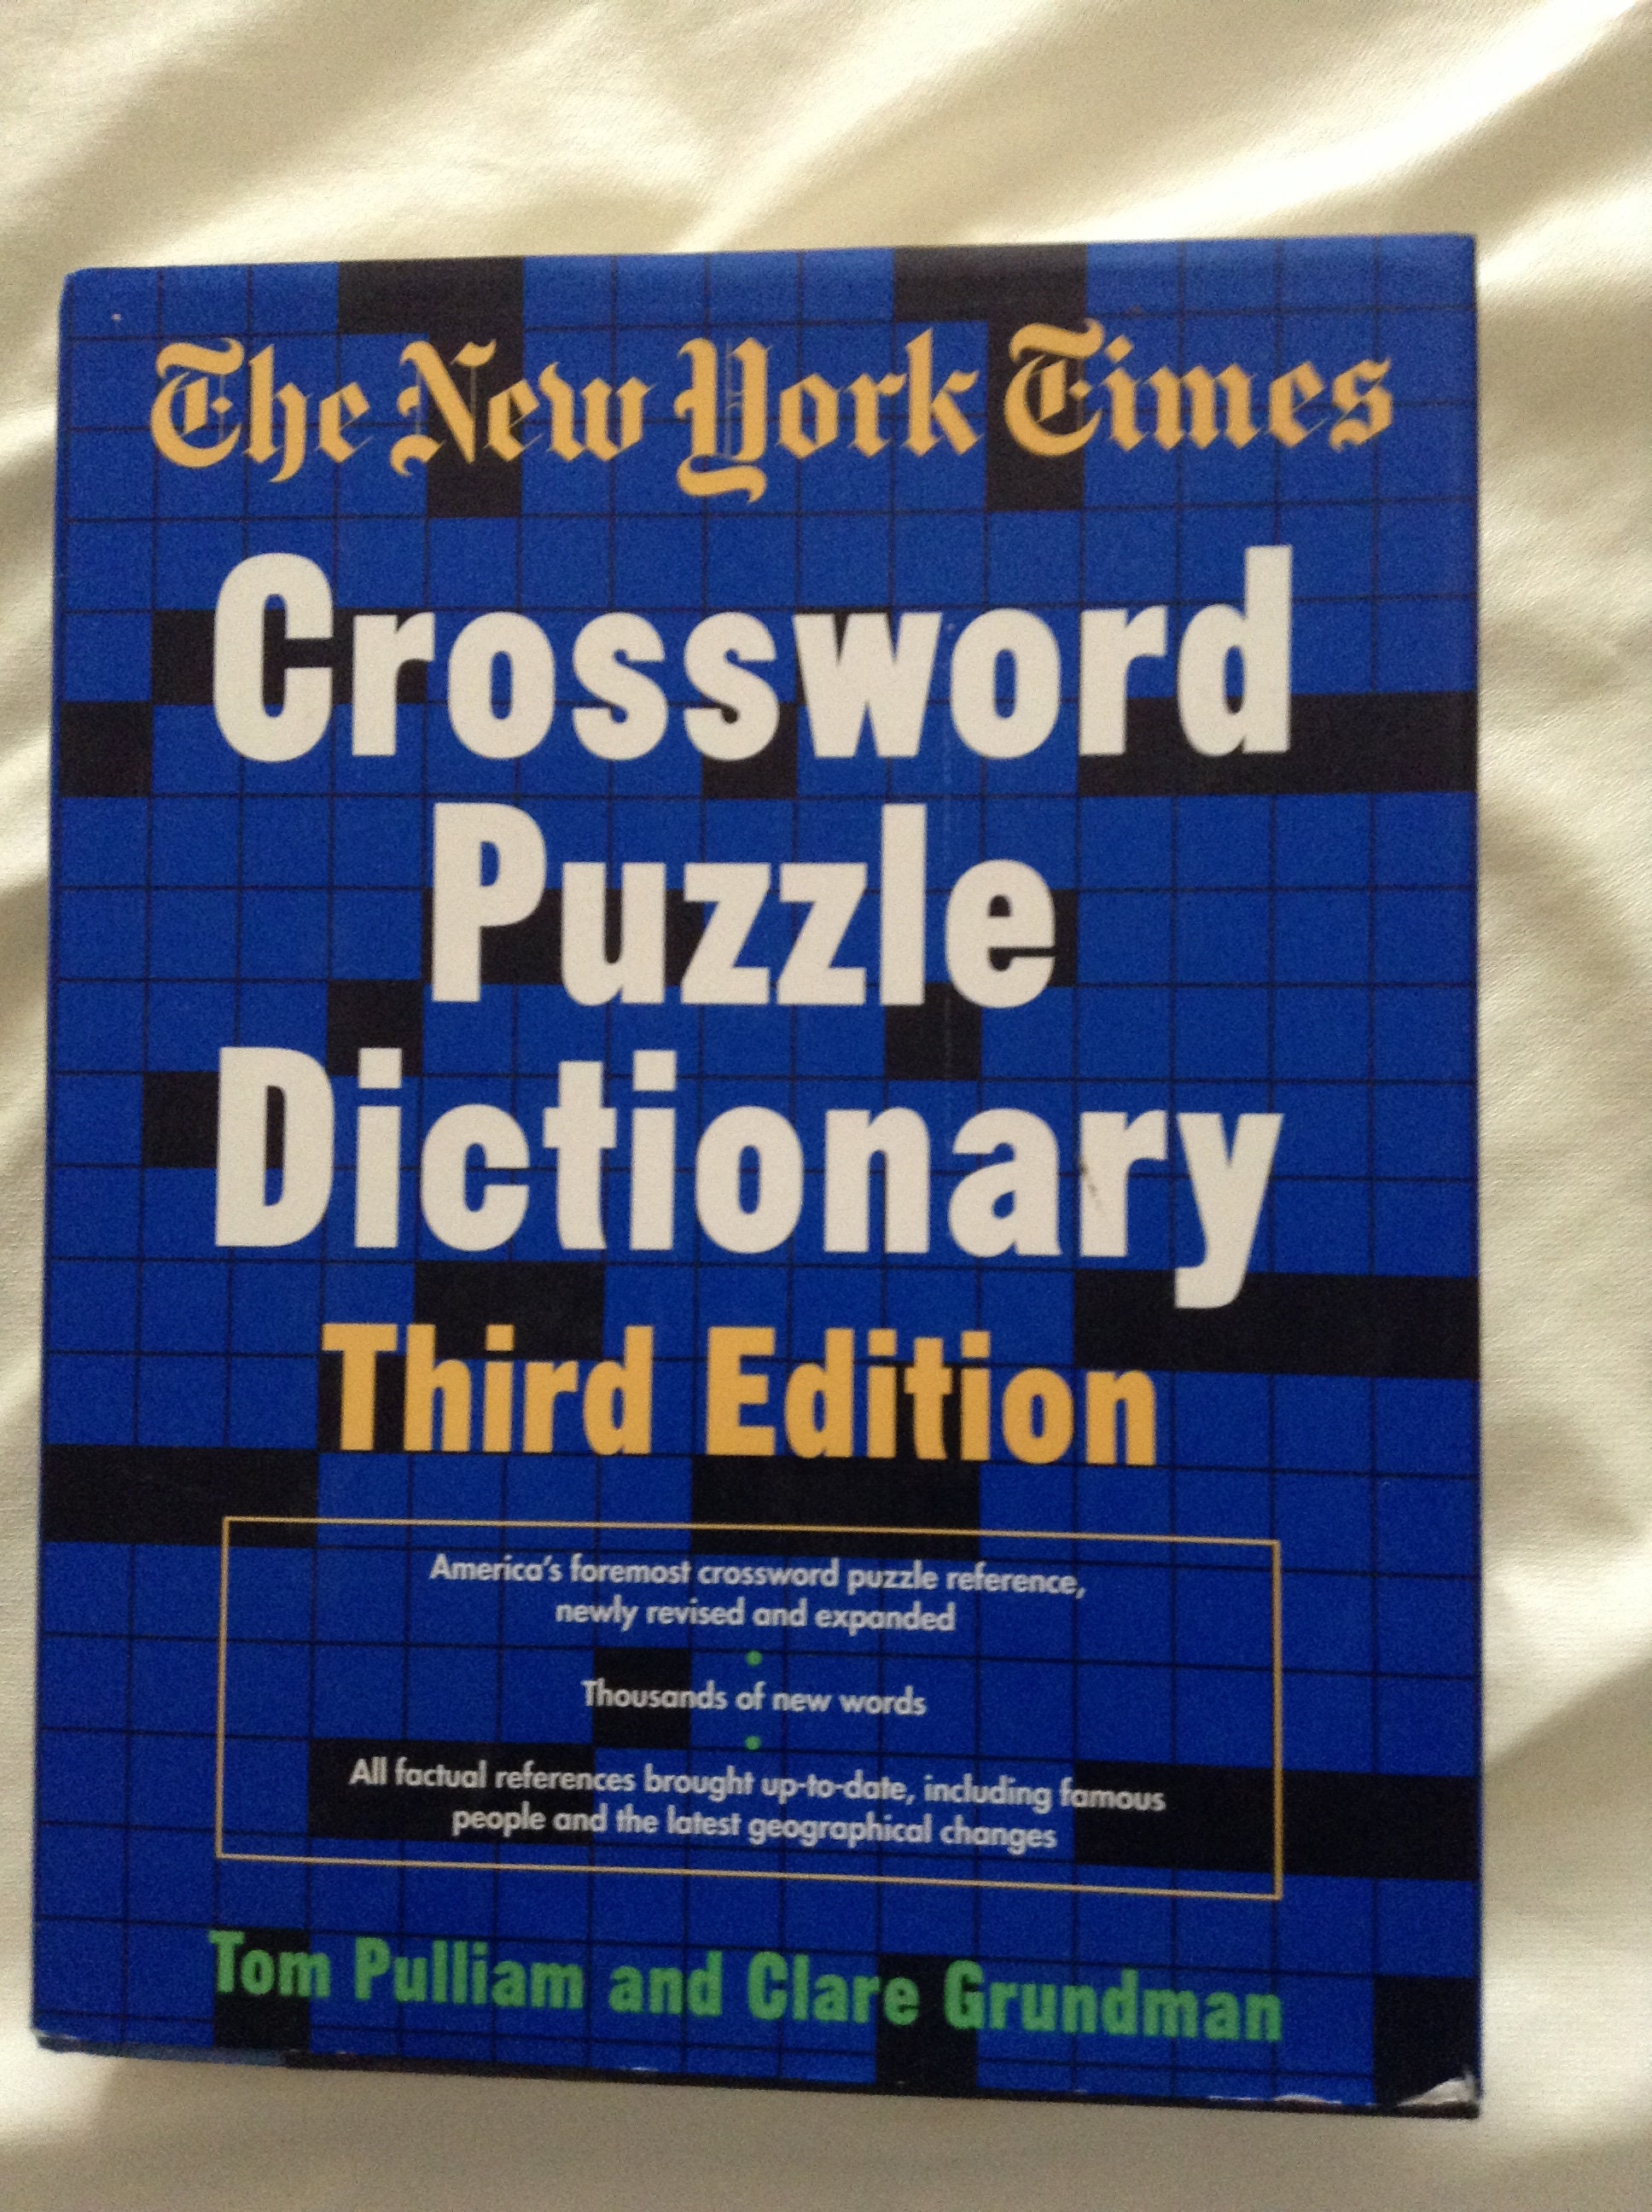 The Pocket Crossword Puzzle Dictionary: Frank Eaton Newman